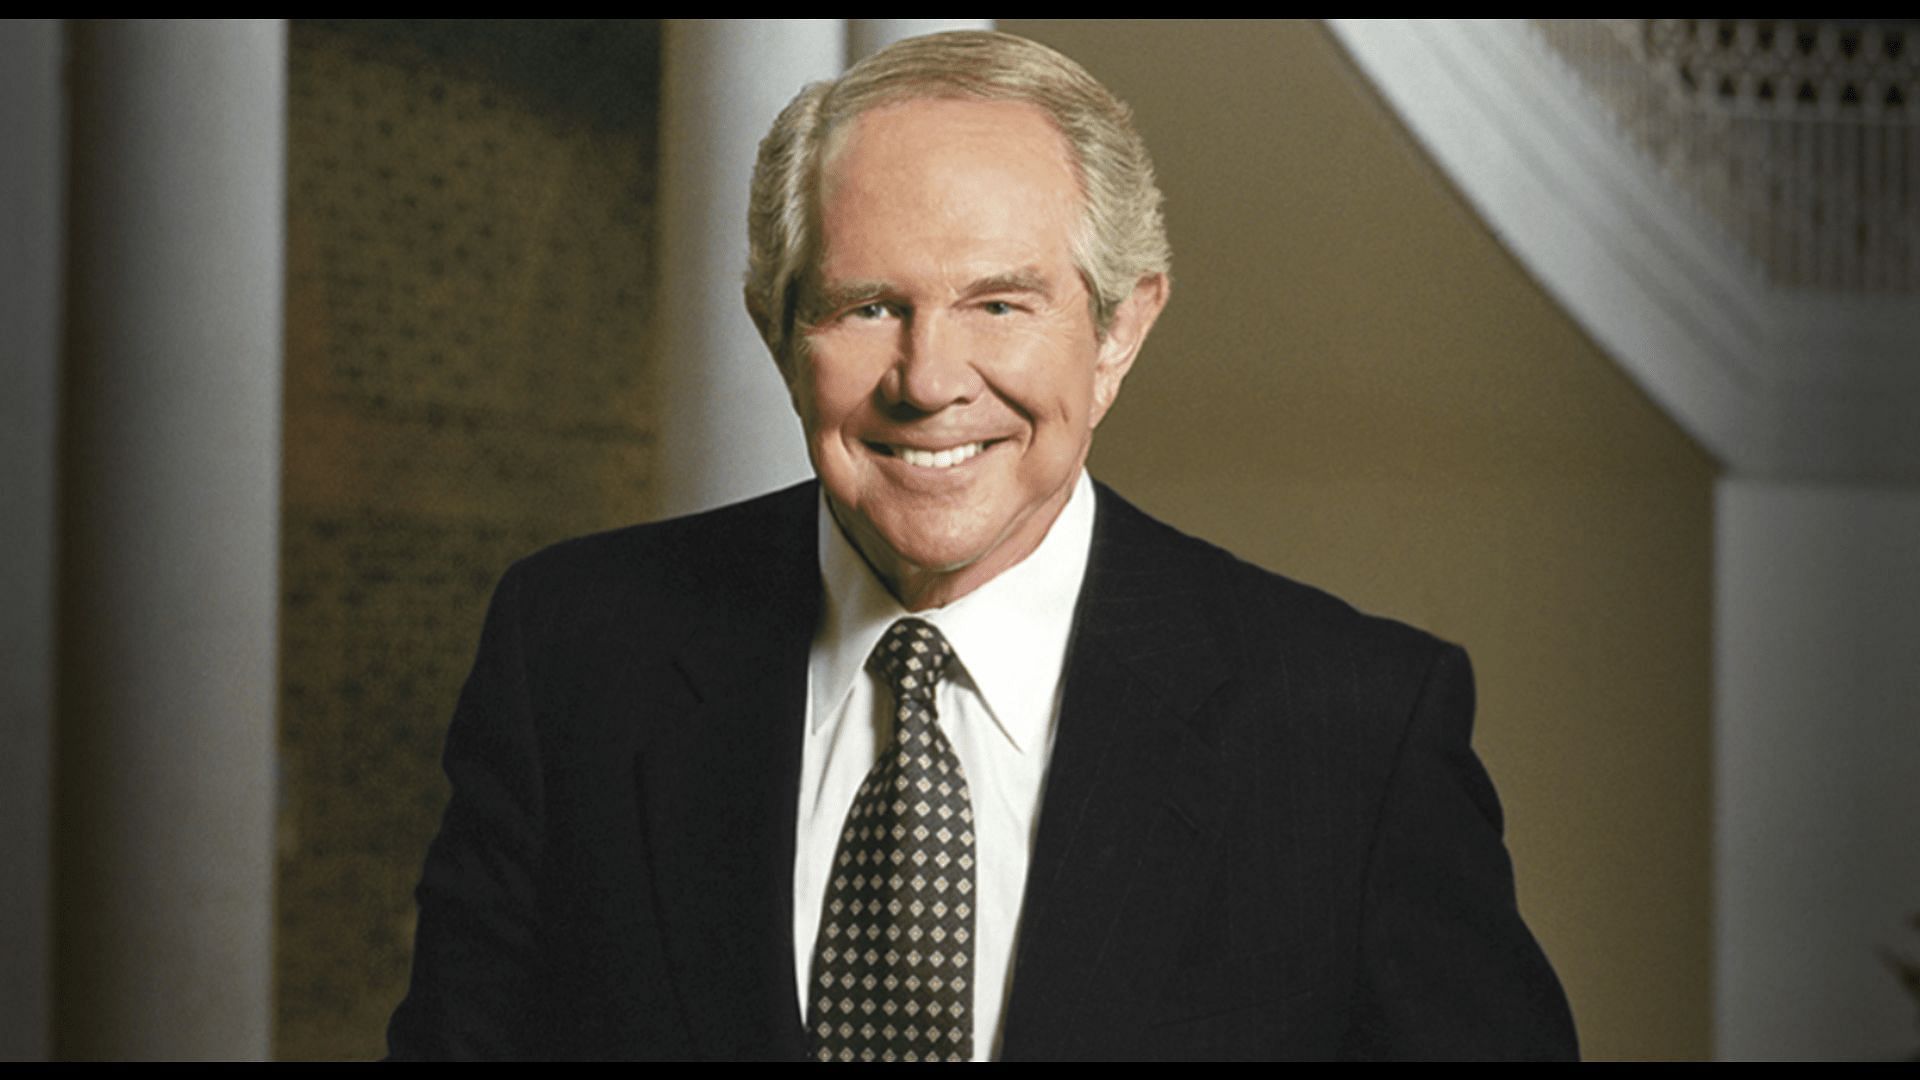 Pat Robertson was an American televangelist who was a US Presidential candidate in 1988. (Image via patrobertson.com)